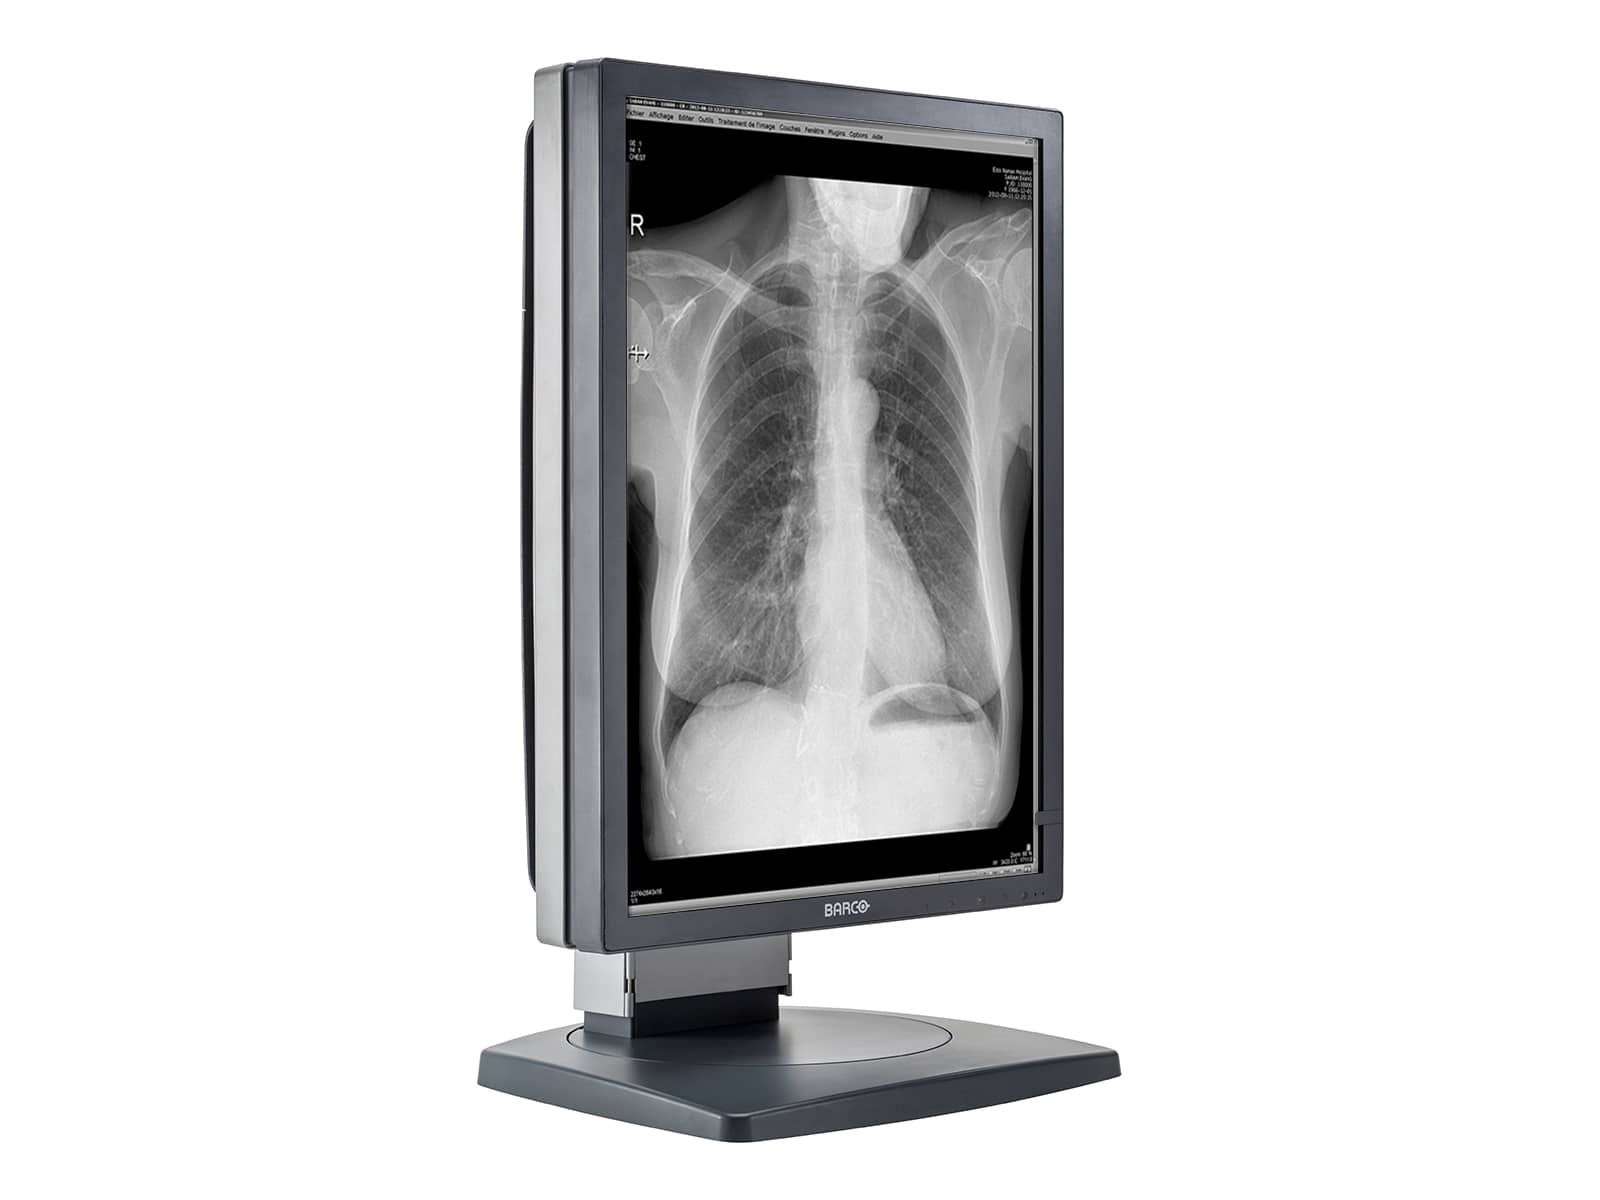 Barco Coronis MDCG-3120 3MP 21" Grayscale General Radiology Diagnostic Display (K9601662) Monitors.com 